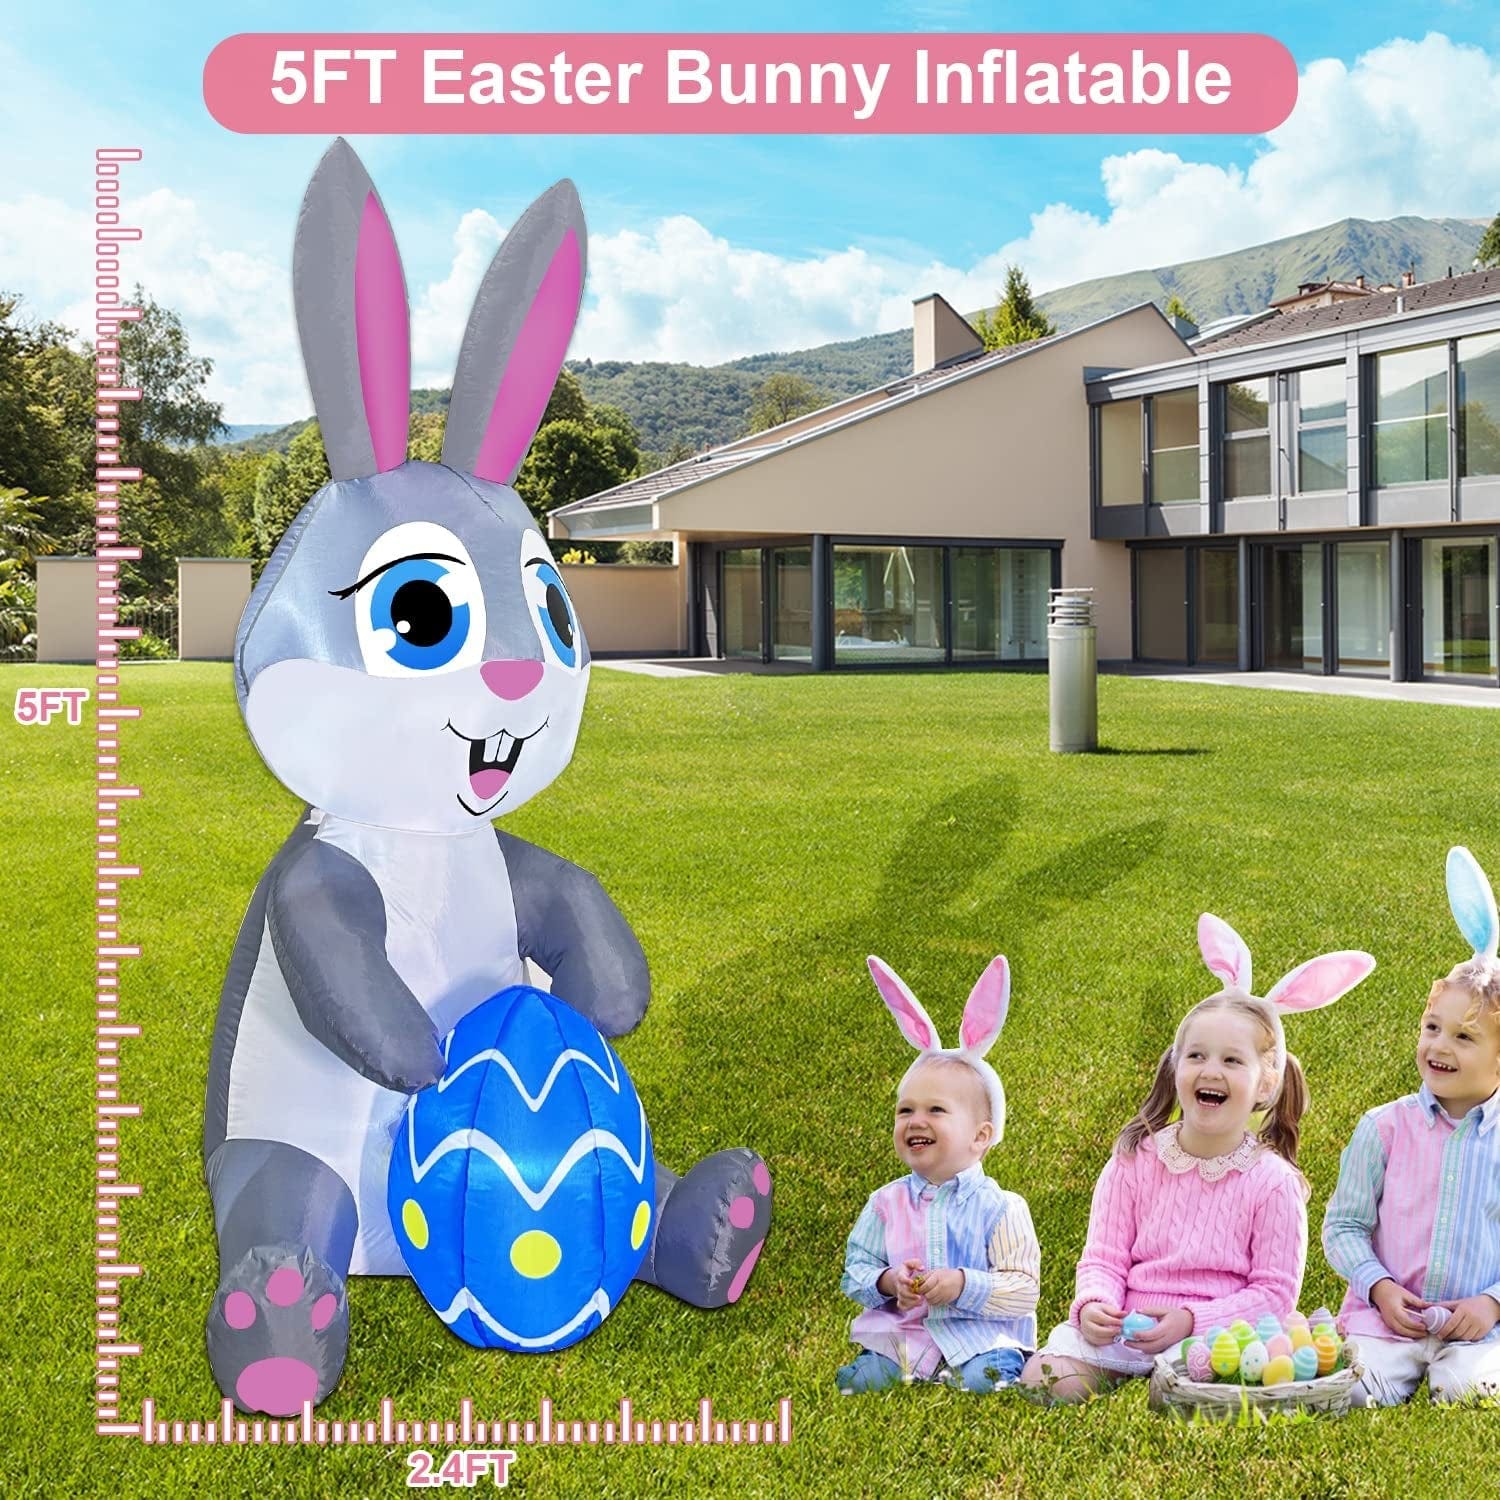 Zukakii 5FT Easter Inflatables Bunny Decorations with Bright Led Light